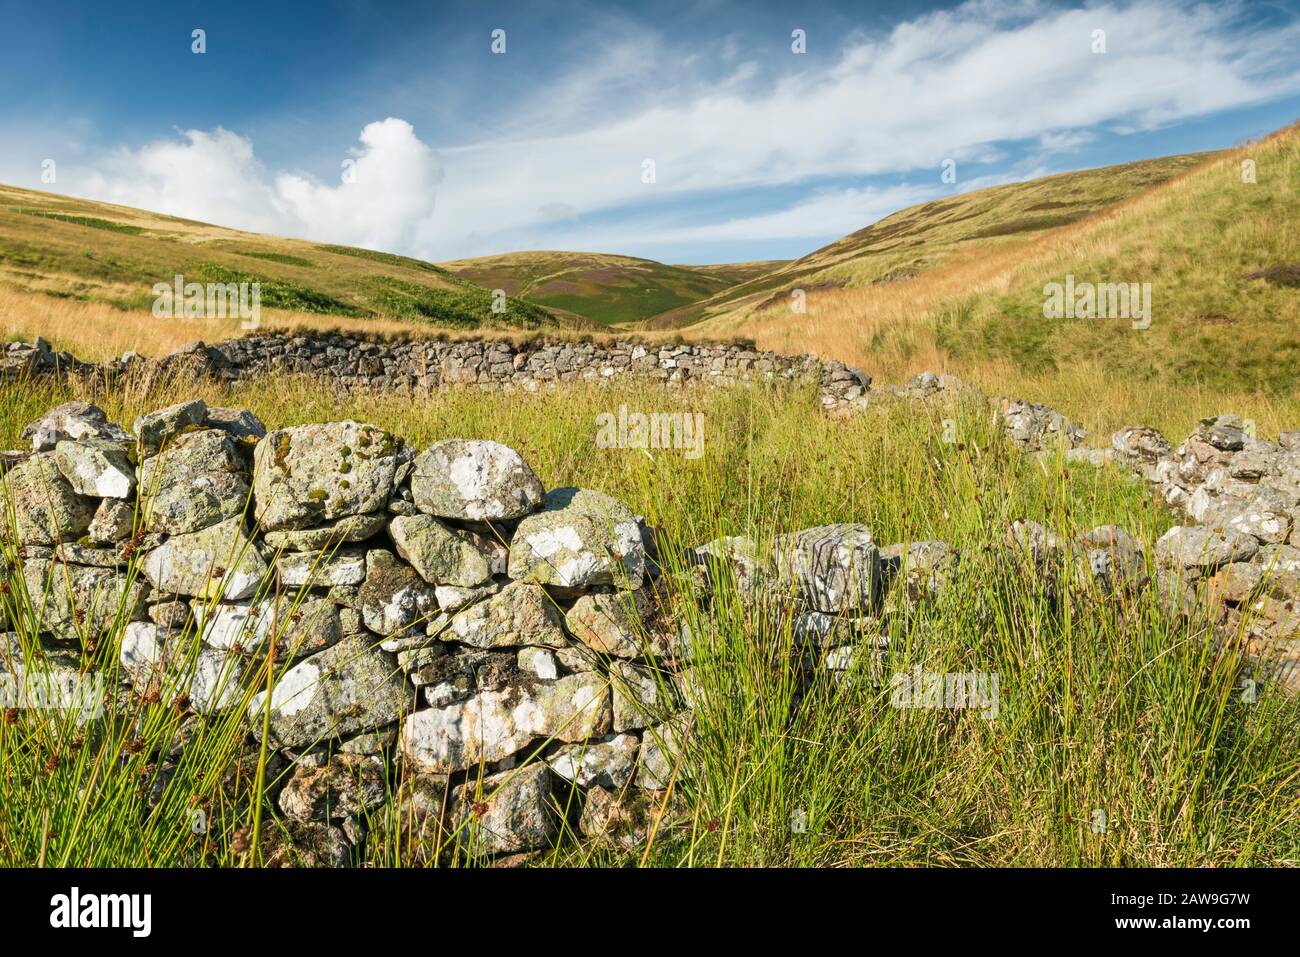 Ovile in Blind Burn Valley guardando verso Lamb Hill, Northumberland National Park, Inghilterra Foto Stock